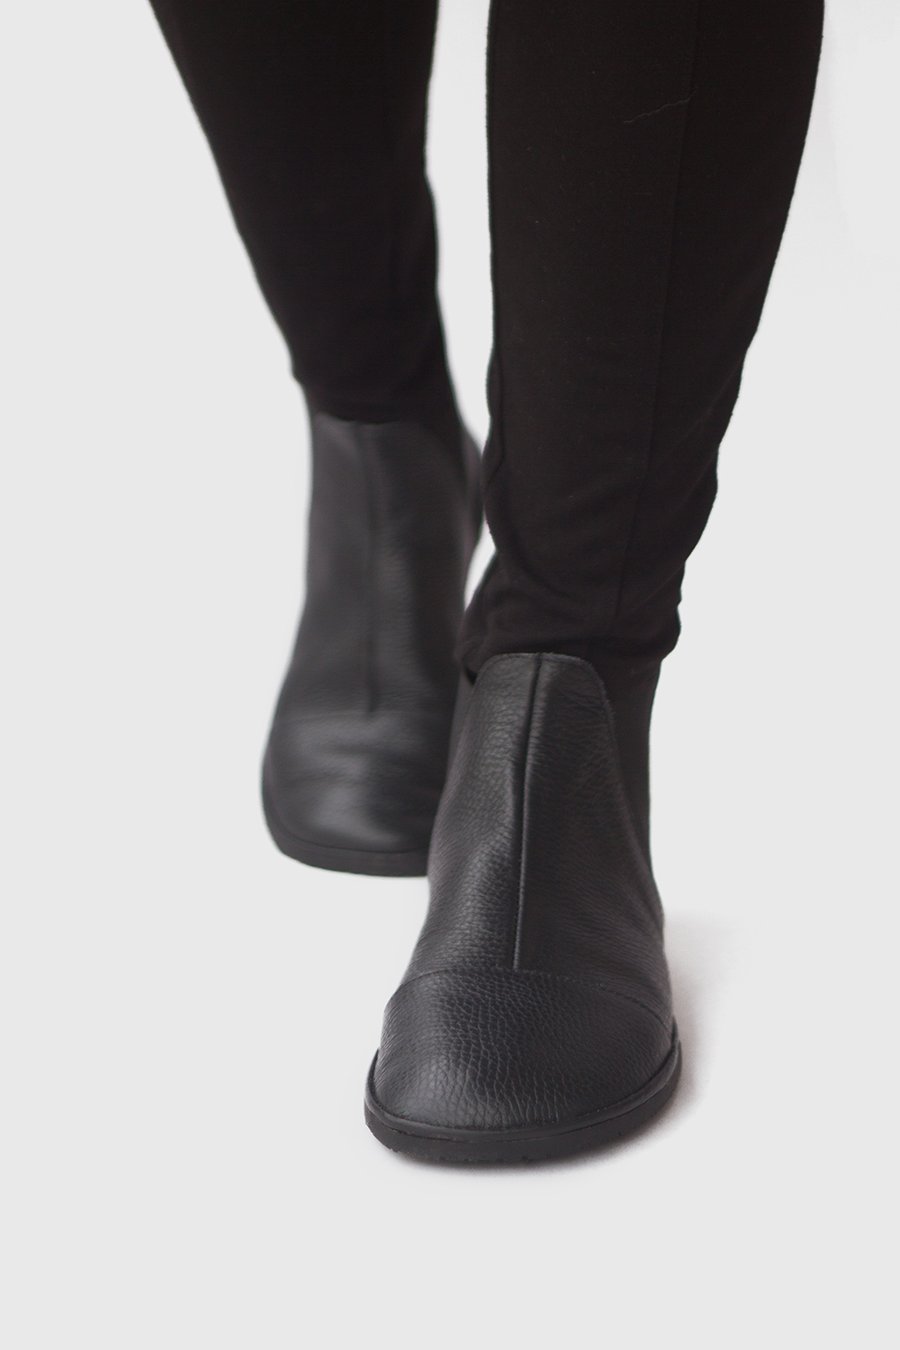 Image of Chelsea boots in Pebbled Black